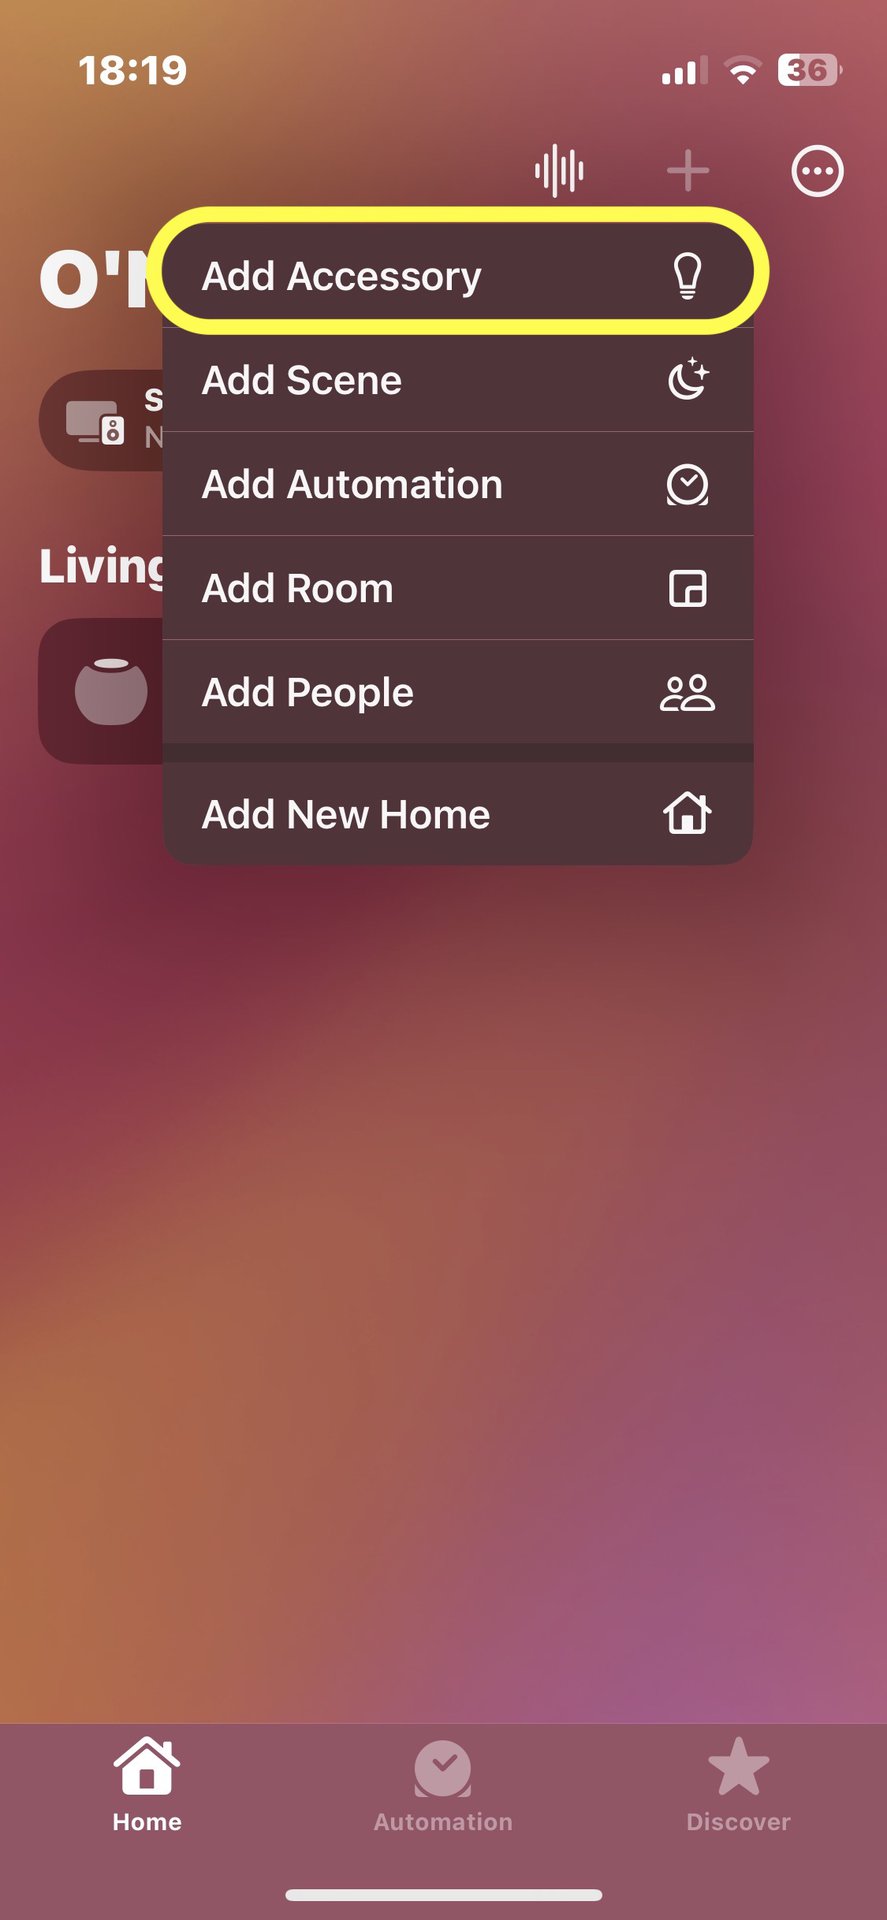 iphone home app add accessory set up homepod